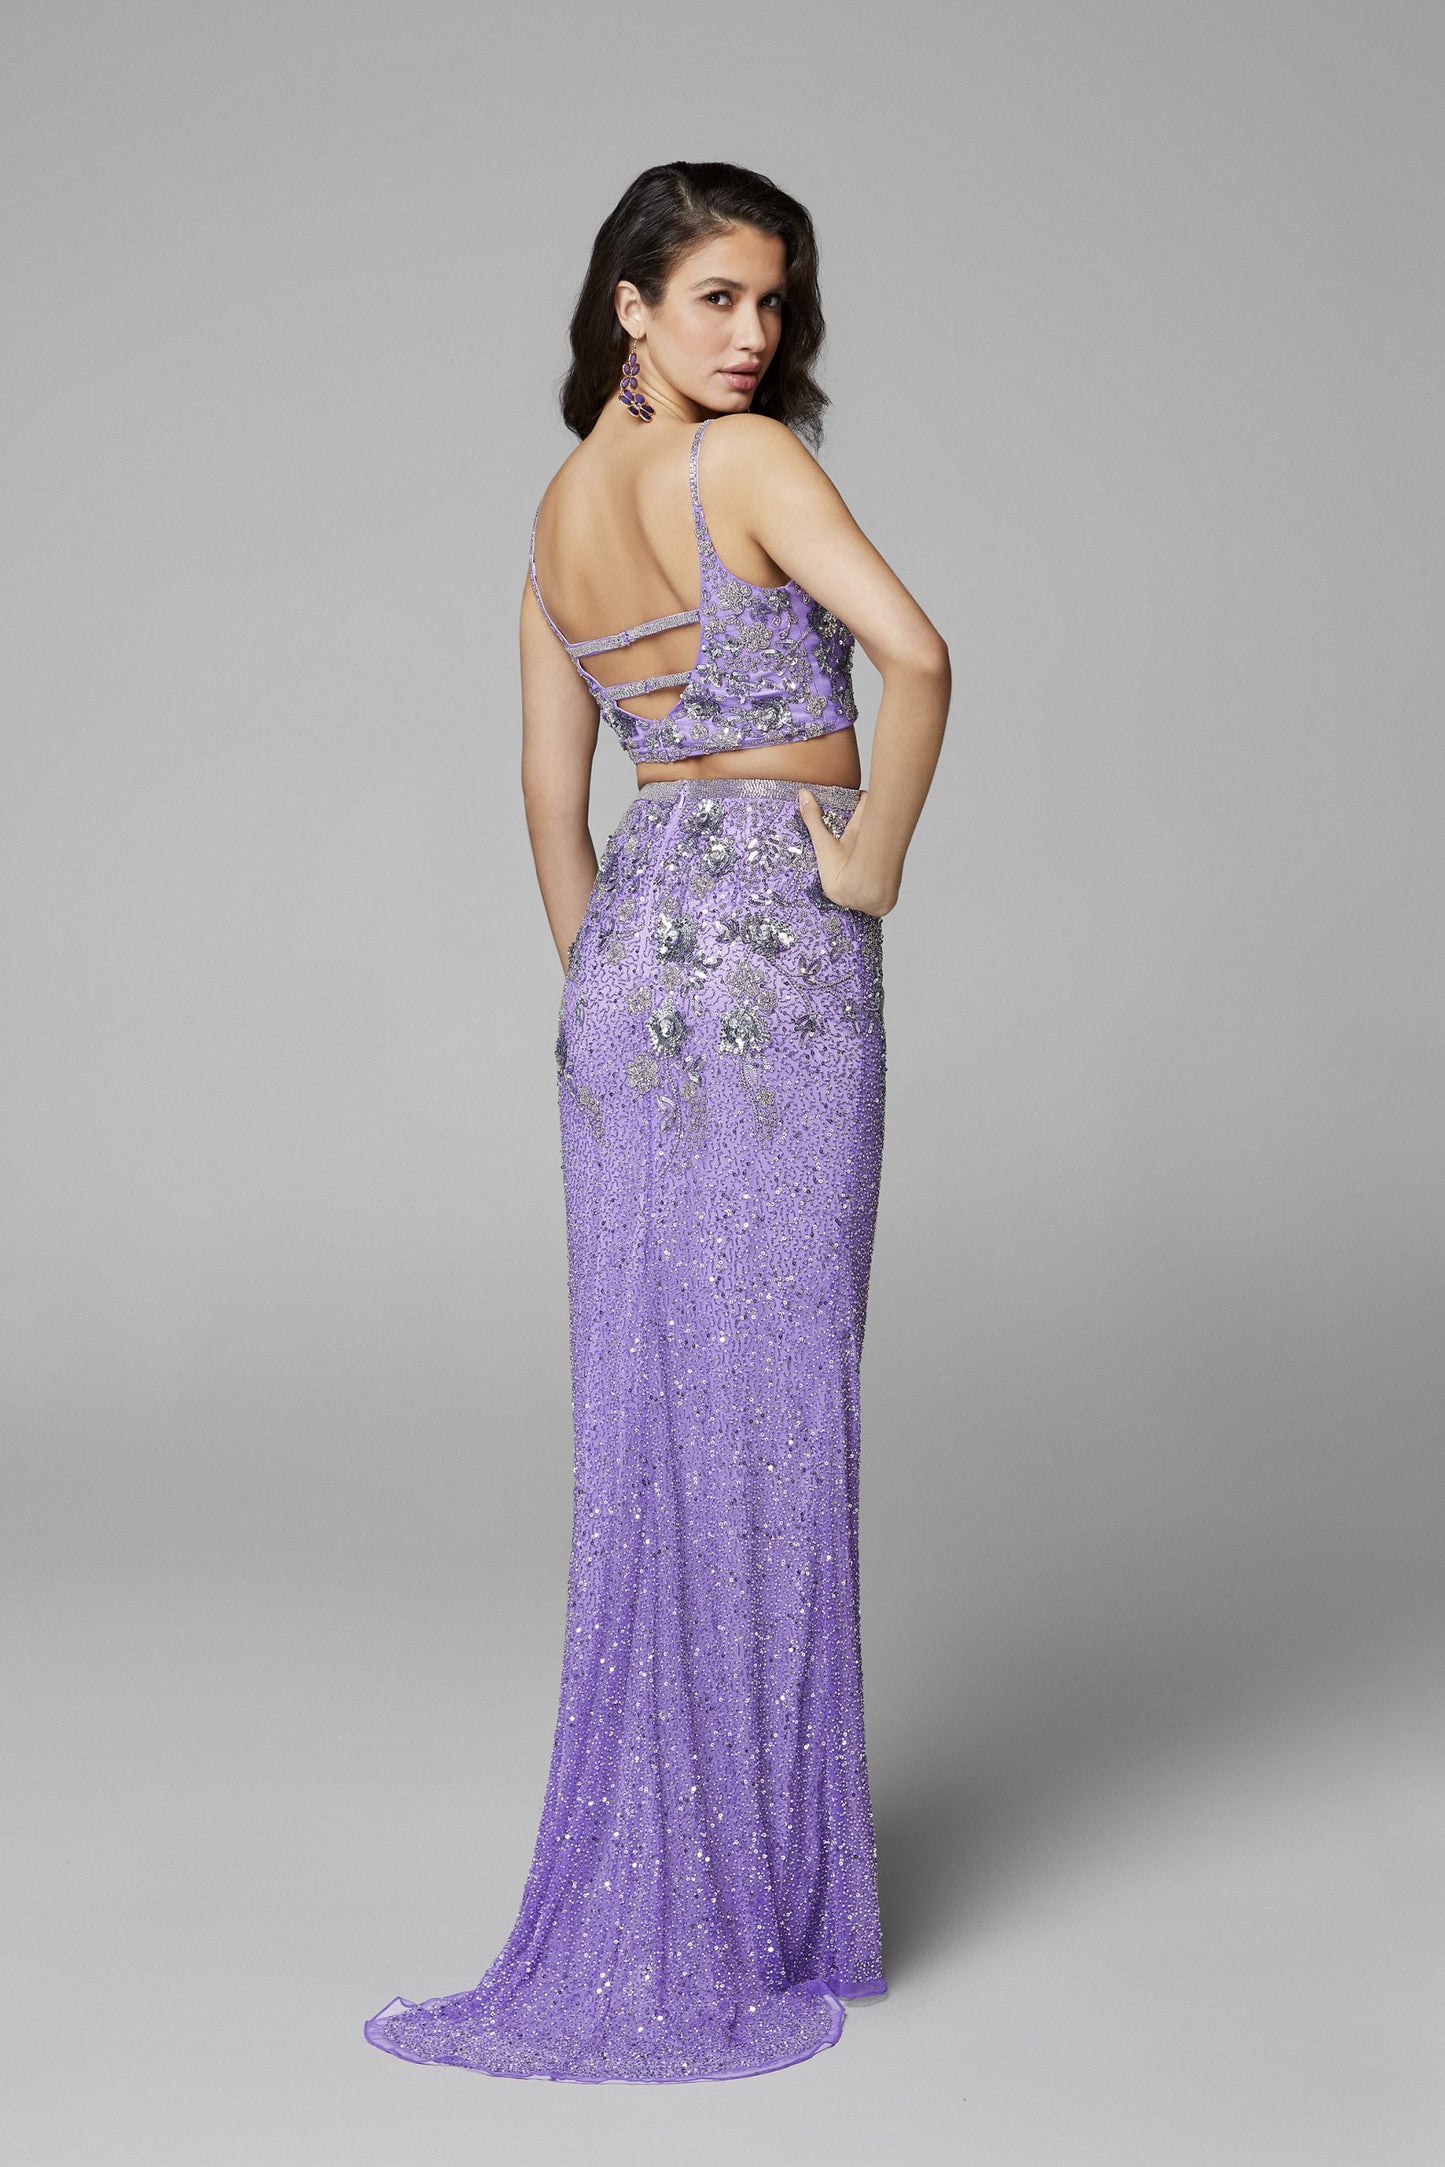 Primavera Couture 3647 is a long fitted two piece formal evening prom dress. Featuring a fitted v neckline bodice with an open back, The skirt has Liquid beaded waist line and a slit & sweeping train. Fully Embellished with beading & Sequins. Detailed Floral patterns are formed and scattered throughout the Pageant gown.   Available Sizes: 00,0,2,4,6,8,10,12,14,16,18  Available Colors: Black, Lilac, Raspberry